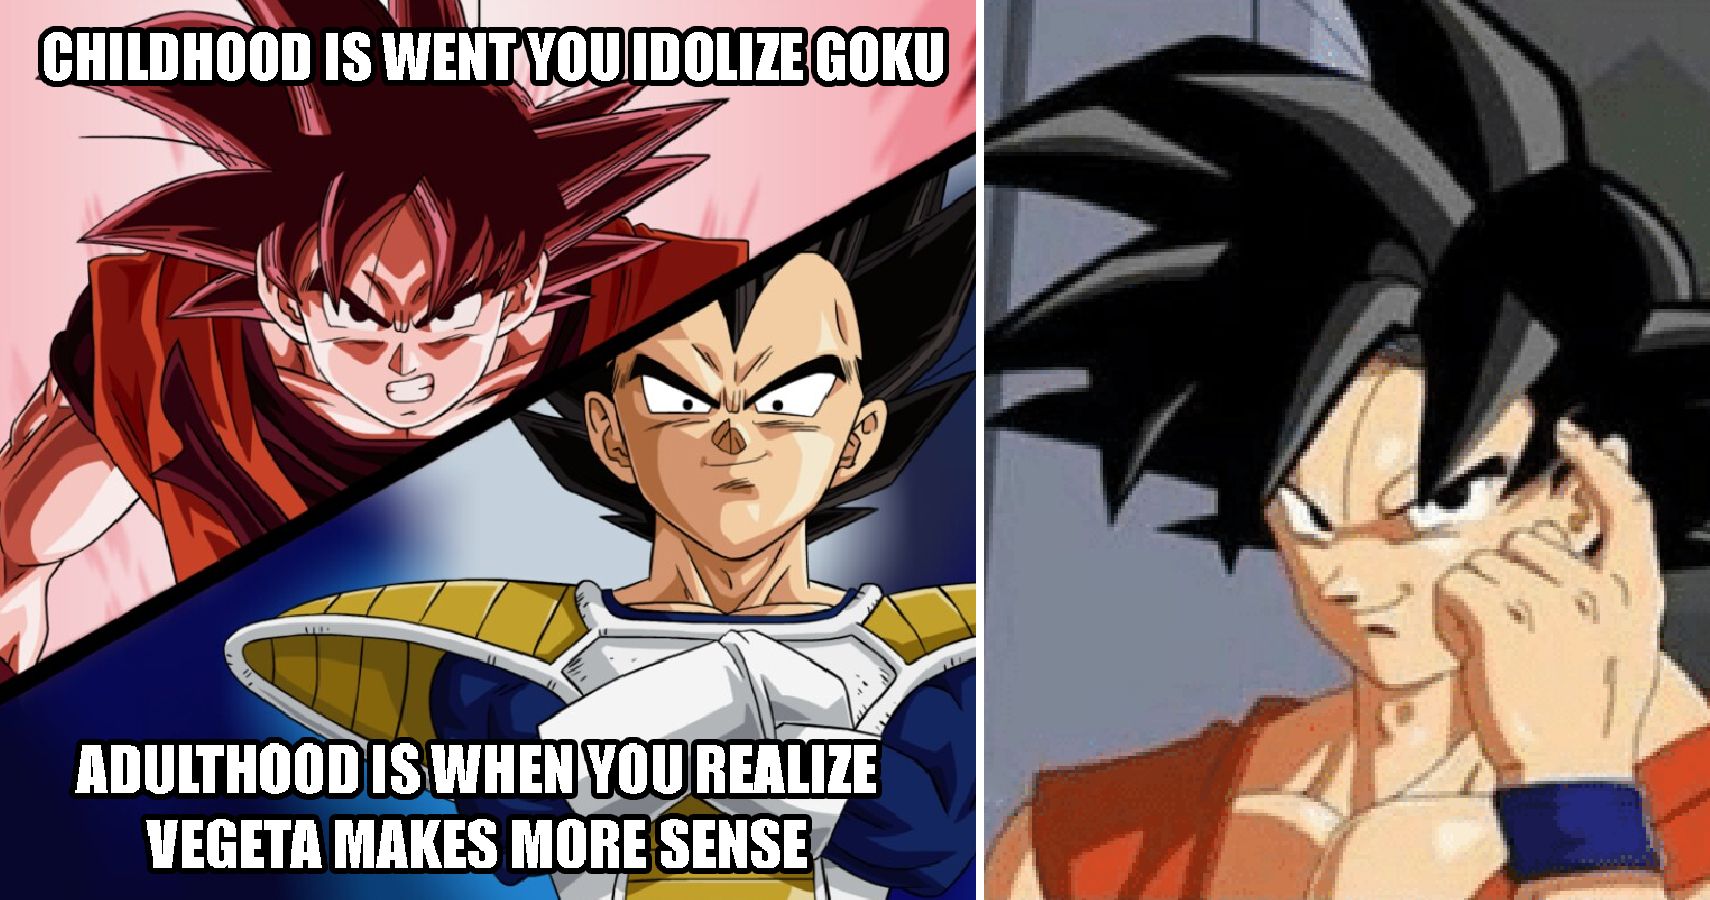 Dragon Ball Memes That Are Too Hilarious For Words | TheGamer